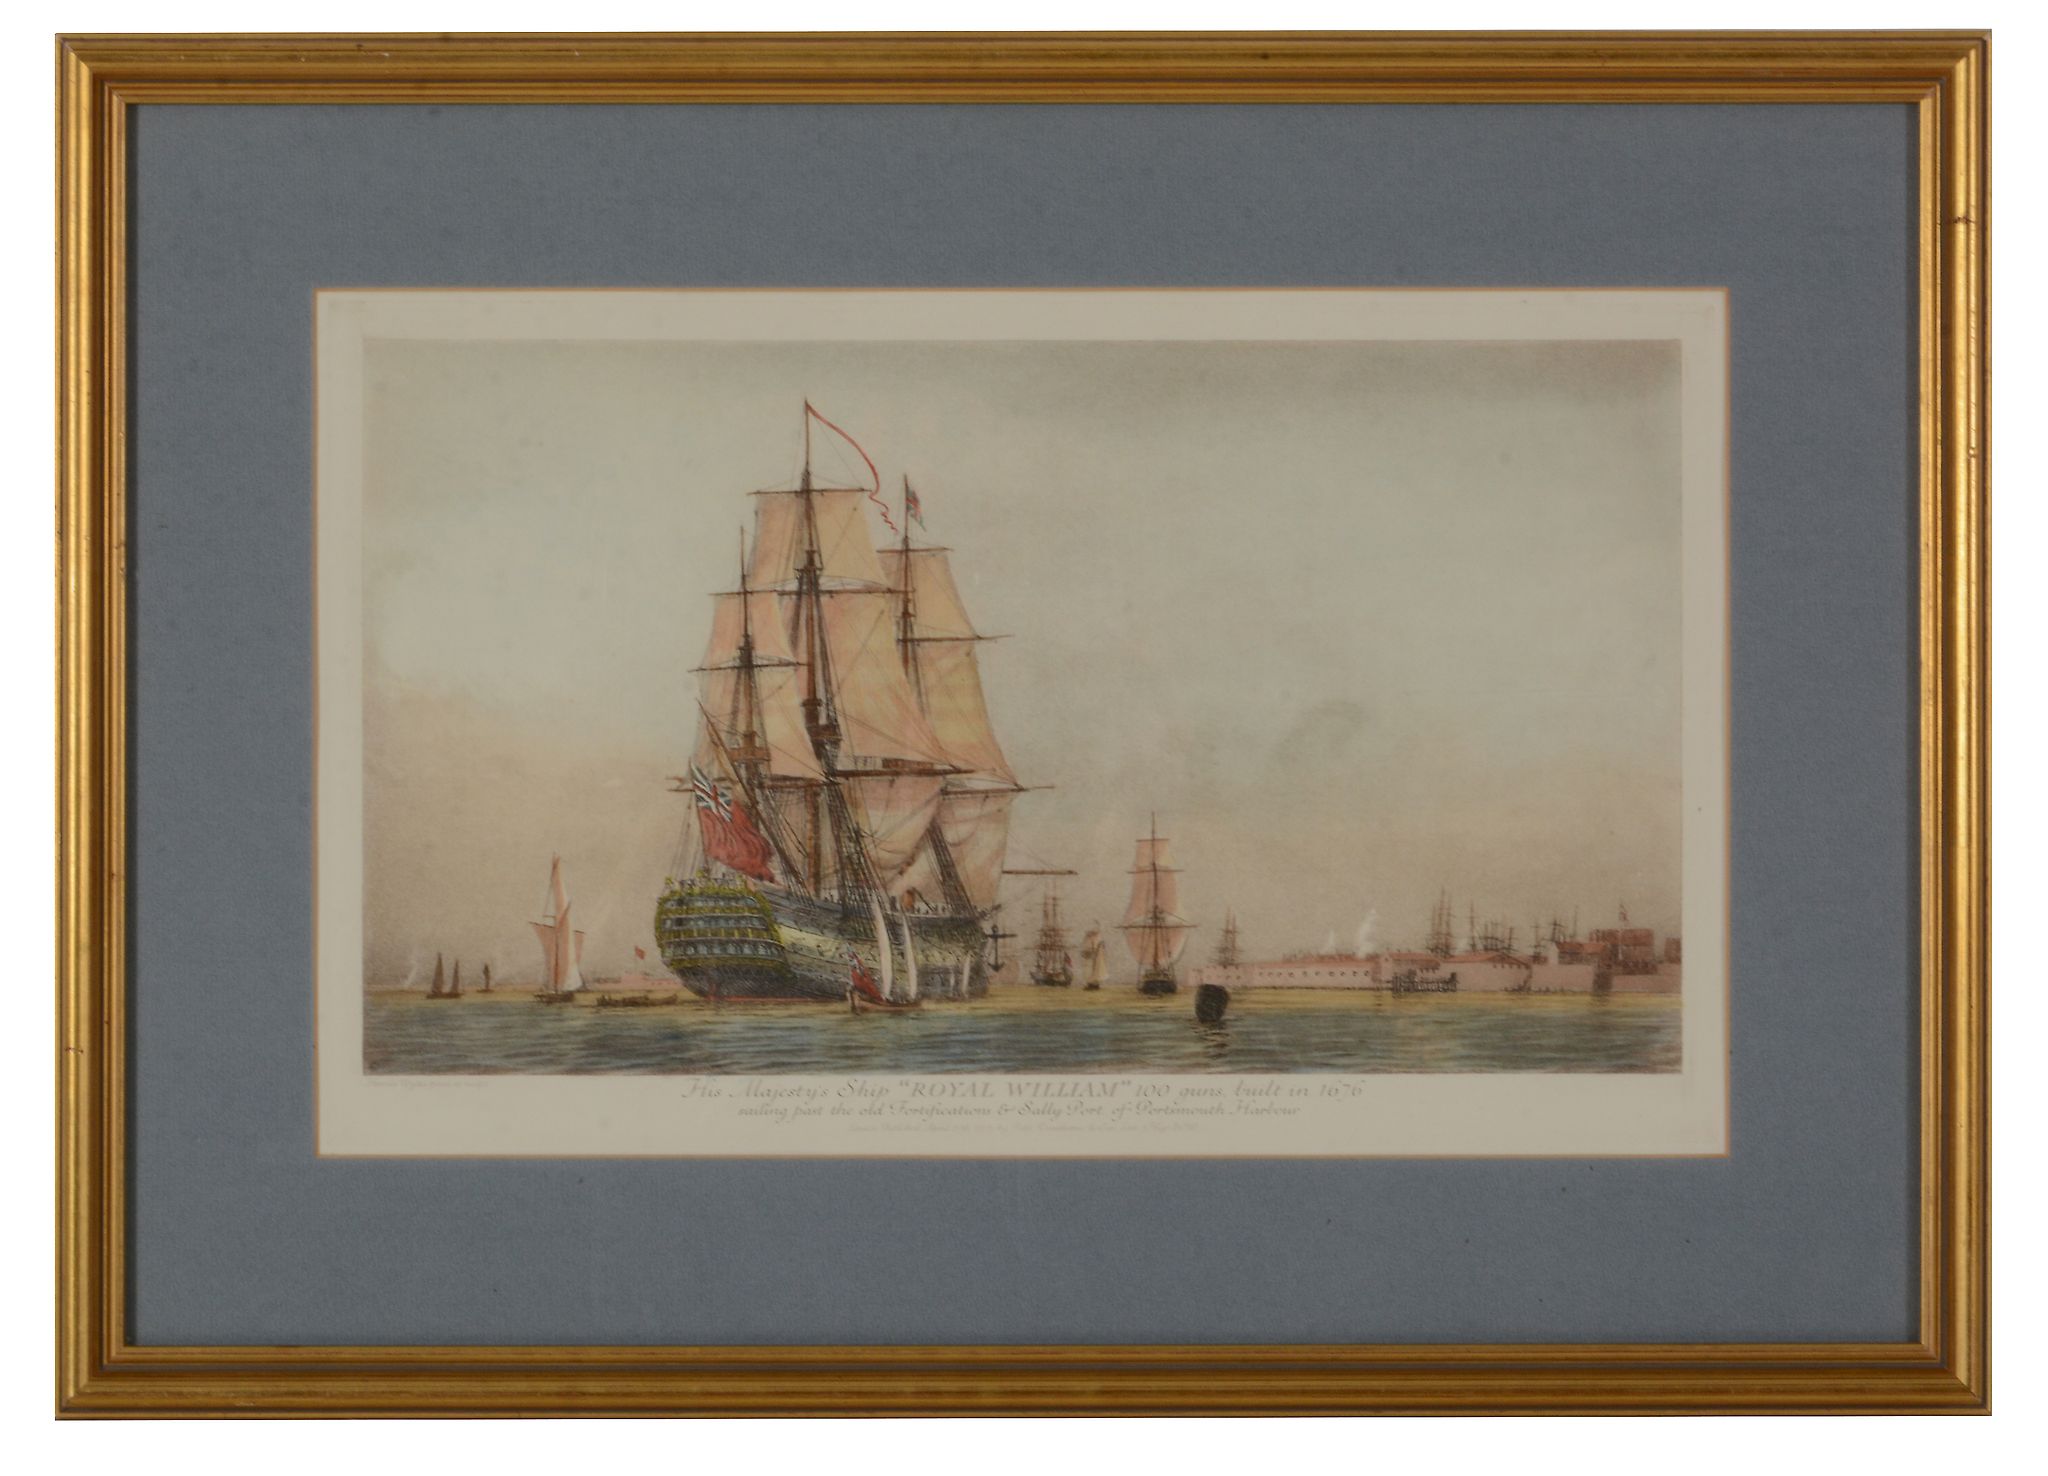 After Harold Wyllie His Majesty's Ship "Royal Willaim" Coloured engraving Plate: 25.5 x 42cm (10 x - Image 2 of 2